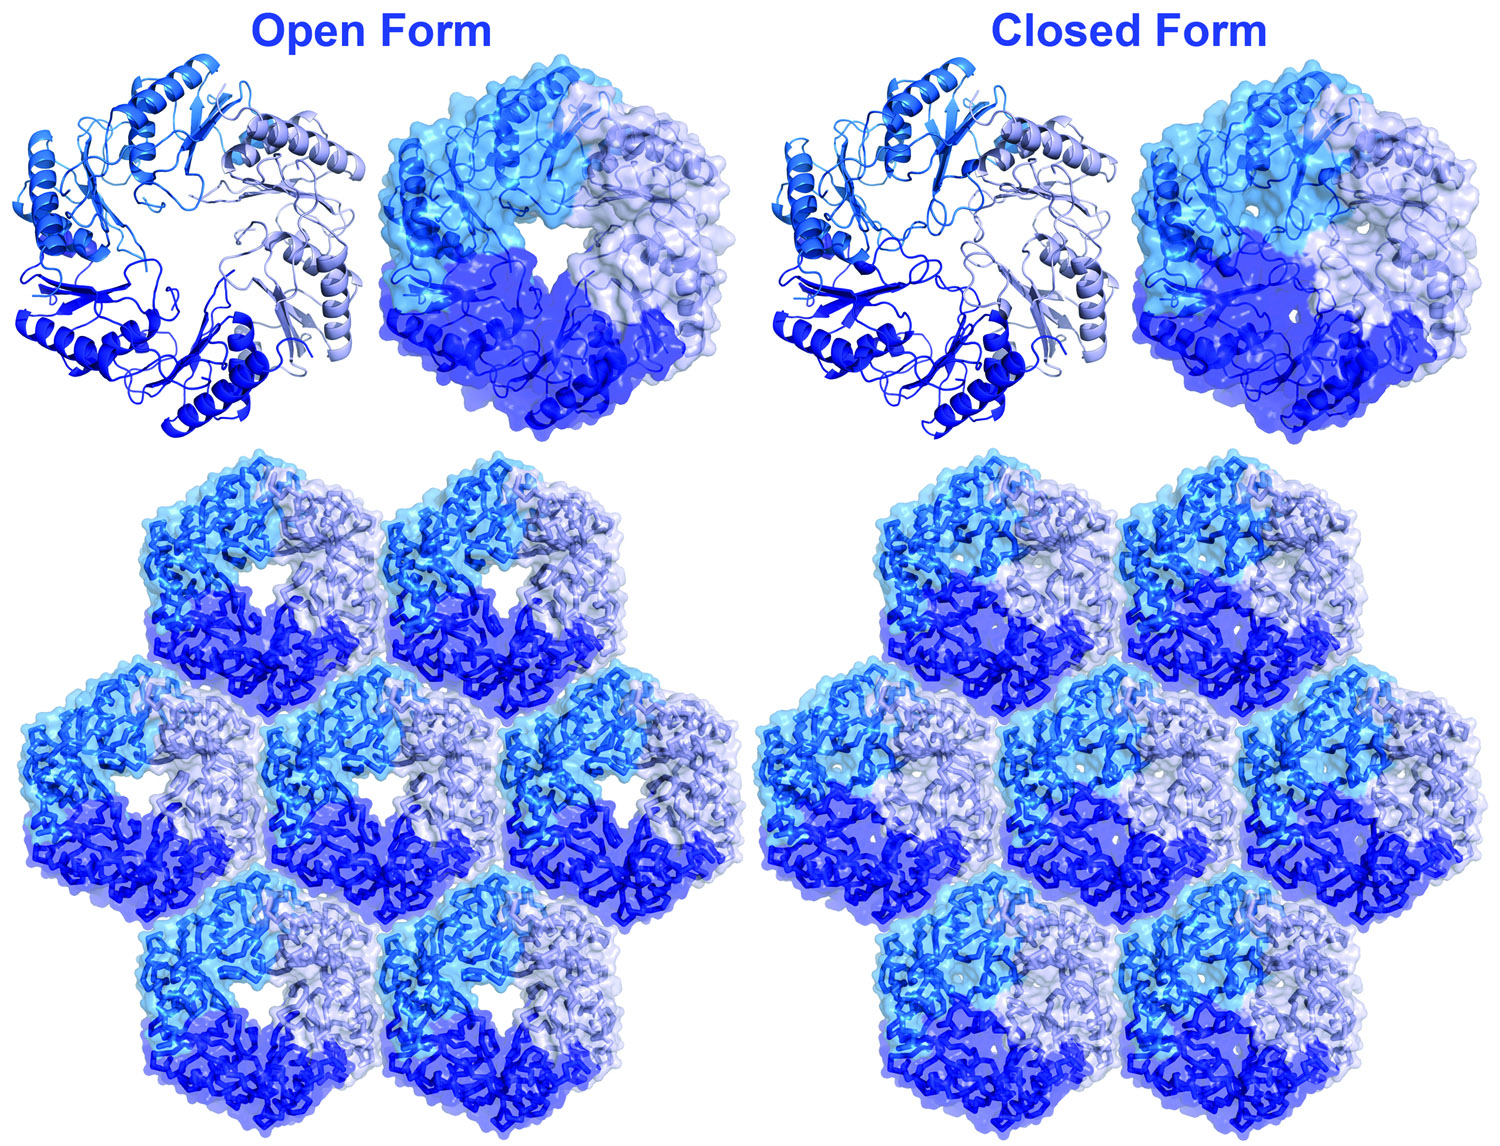 Open and closed pore forms of a BMC shell protein (EutL). (Adapted from Tanaka, et al., 2010)